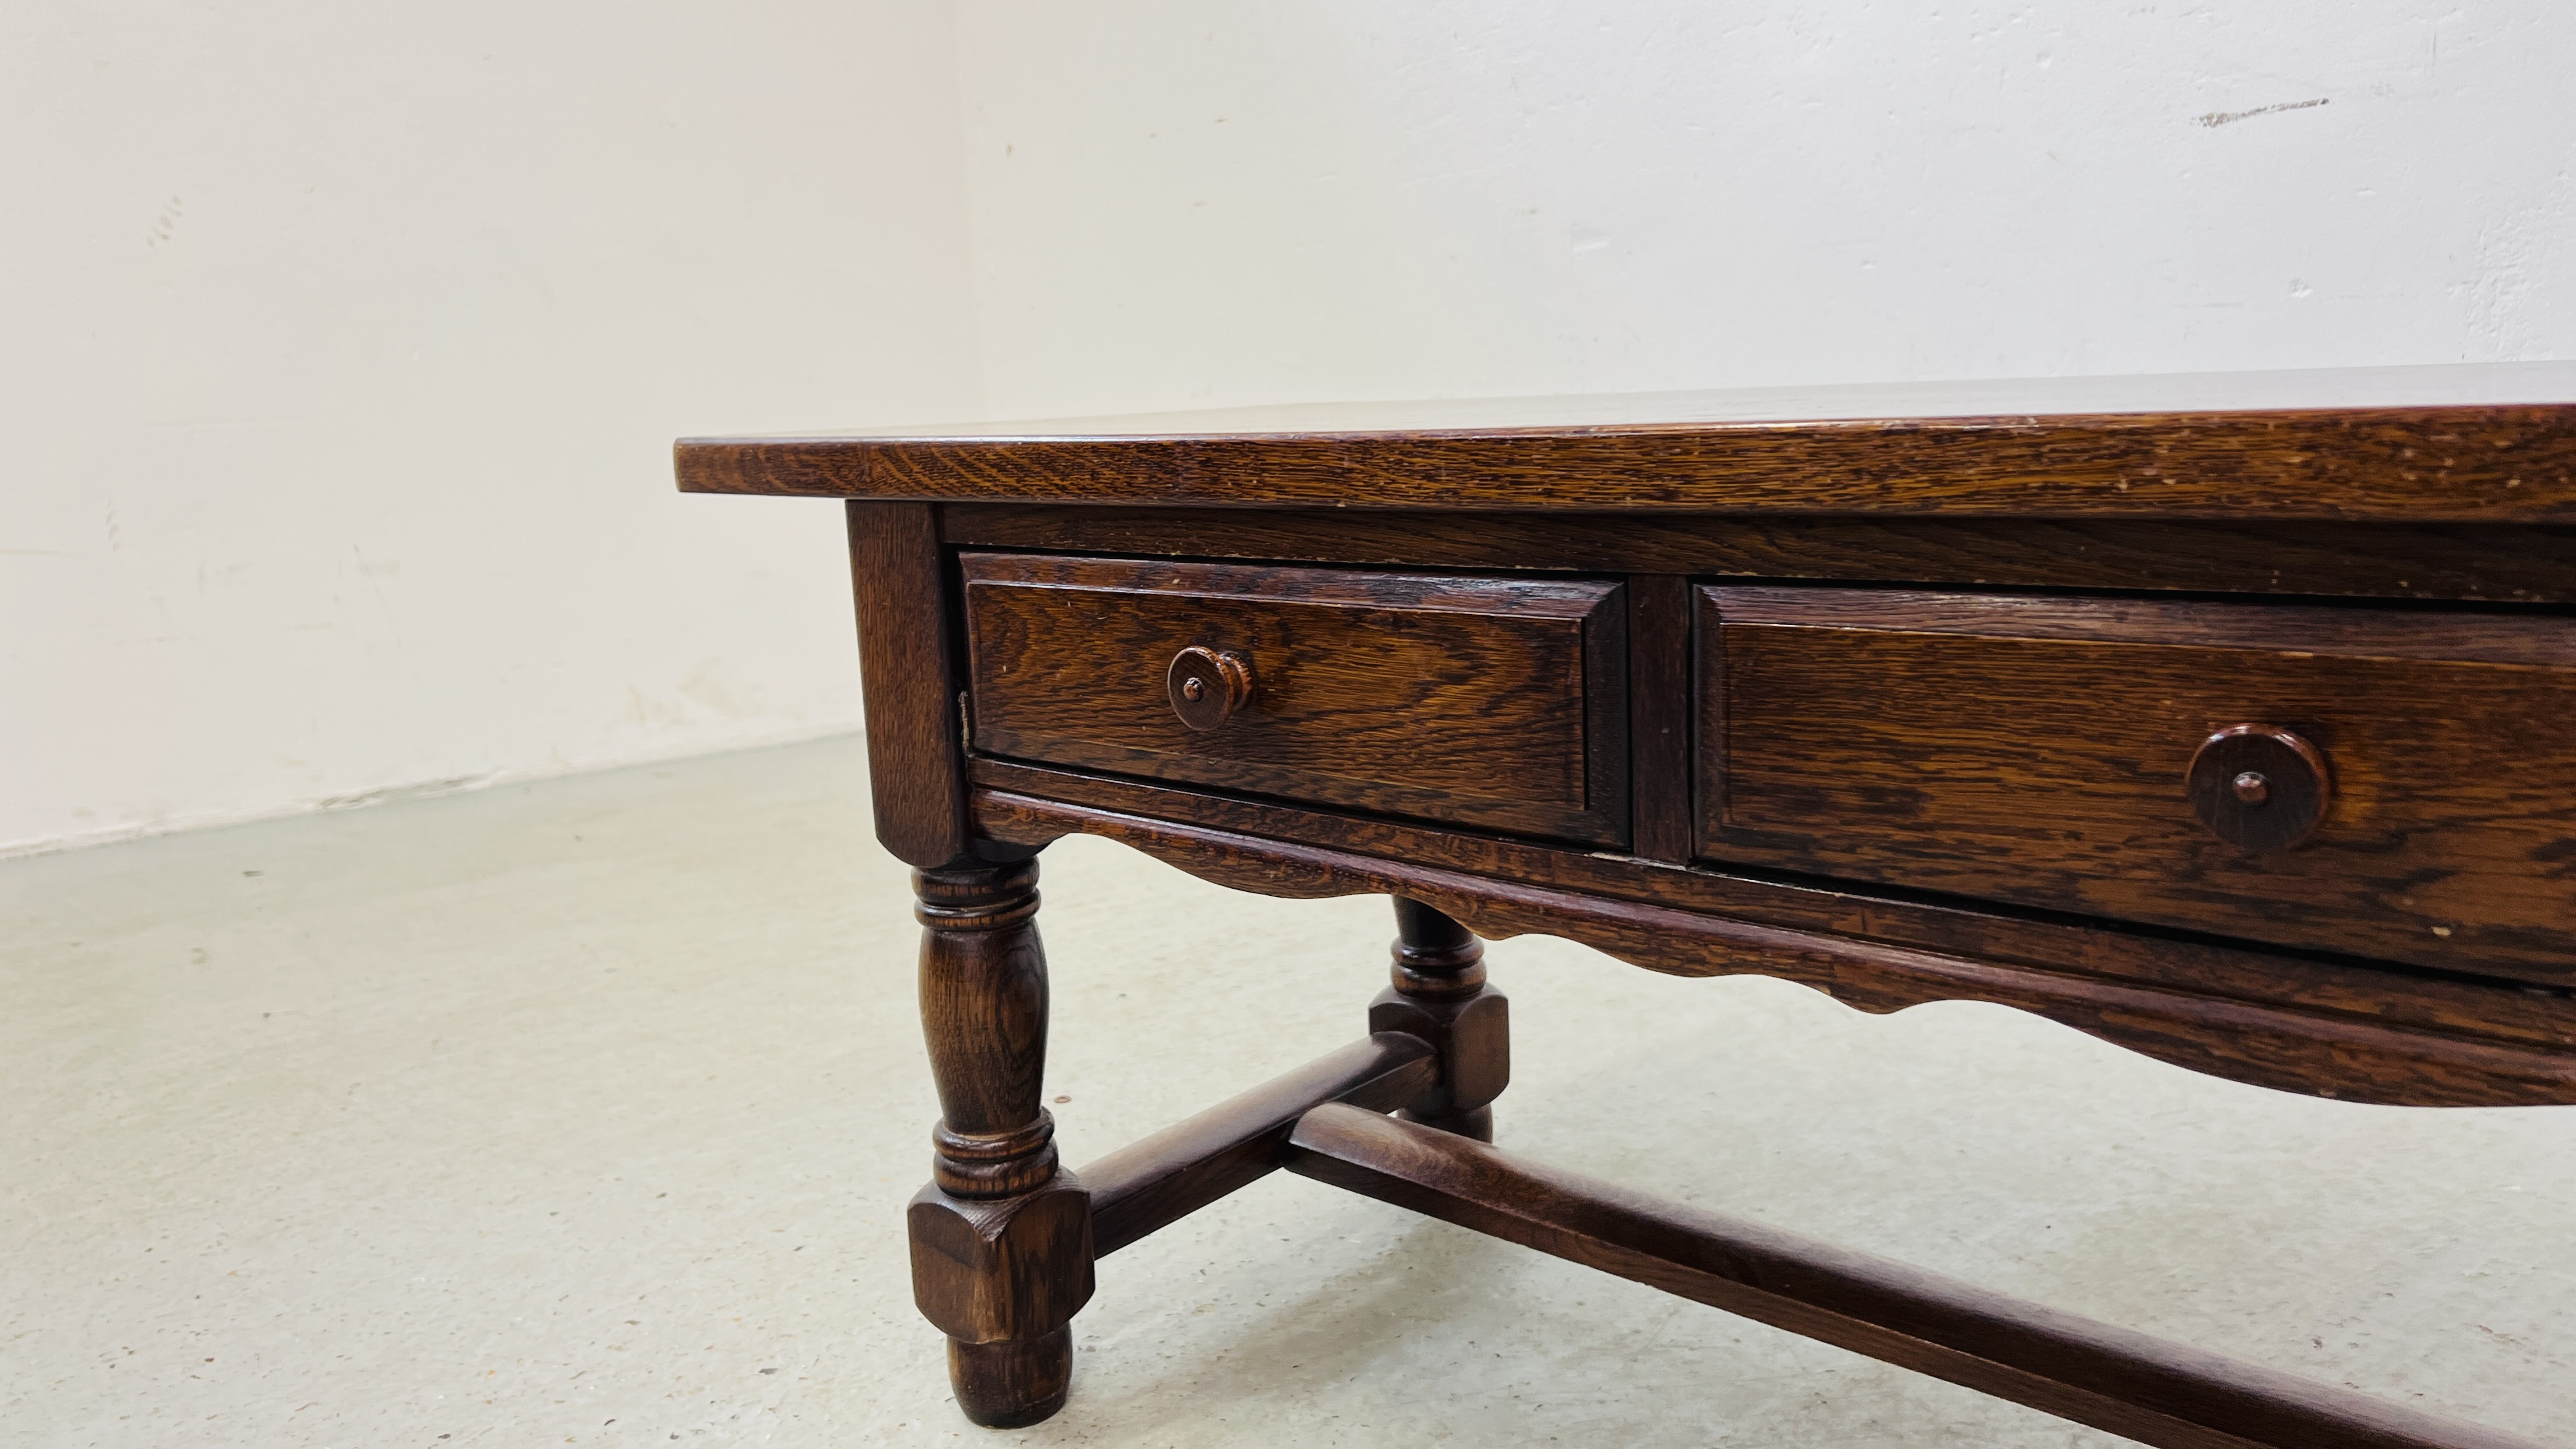 AN OAK TWO DRAWER GOOD QUALITY REPRODUCTION COFFEE TABLE LENGTH 114CM. WIDTH 49CM. HEIGHT 50CM. - Image 3 of 7